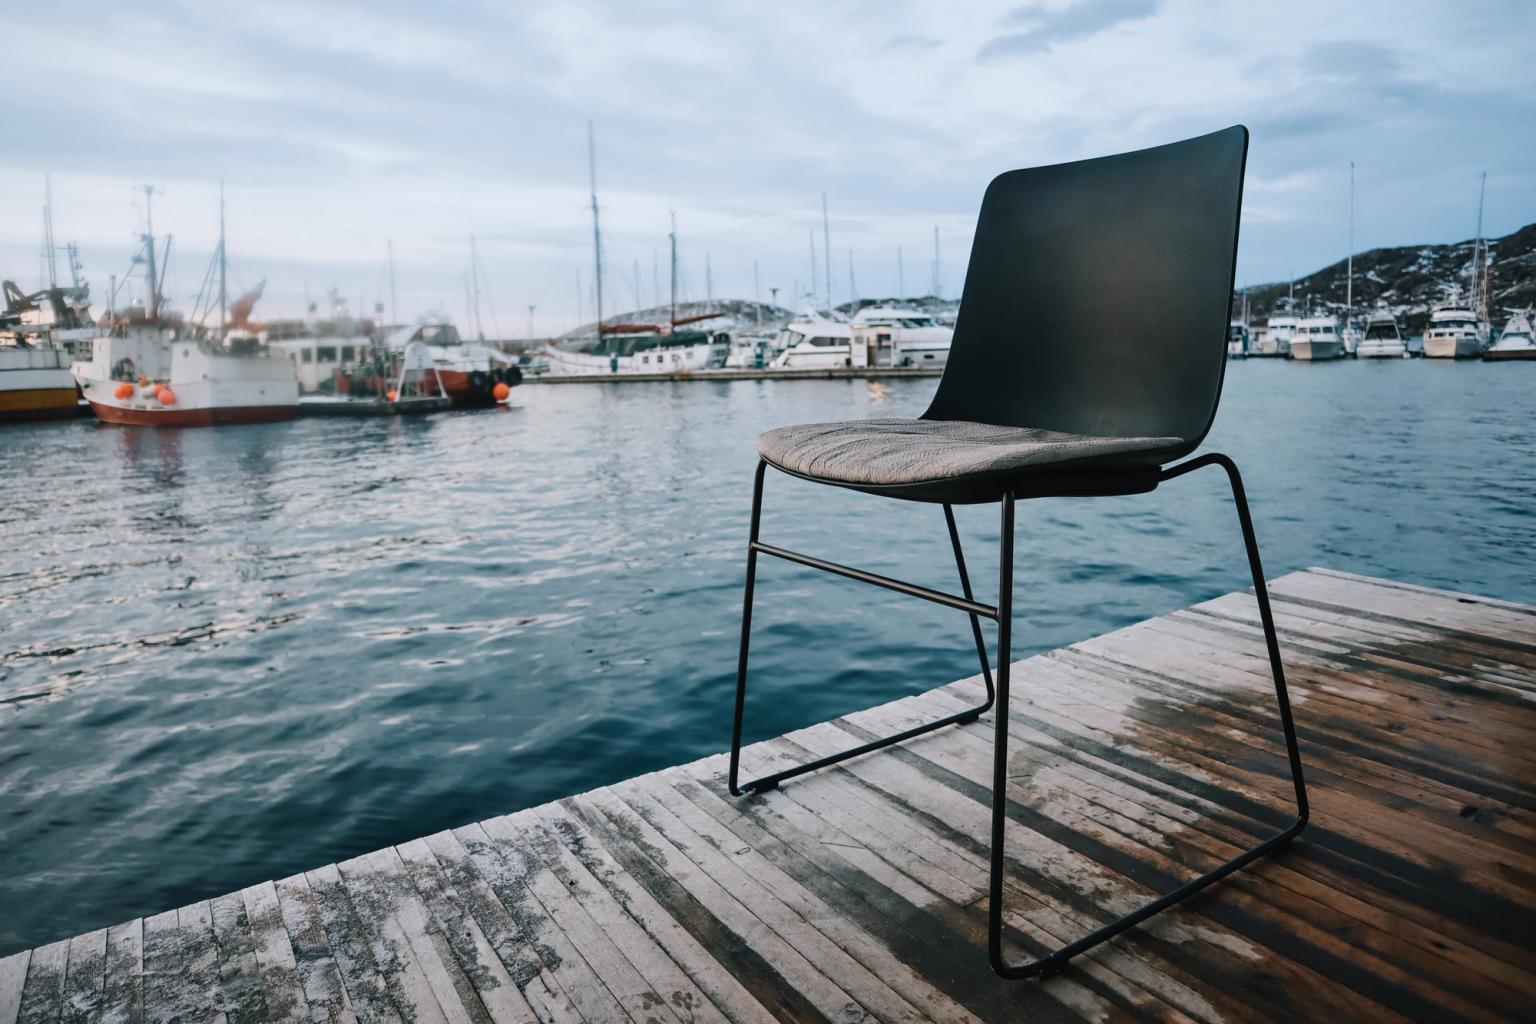 Chair with salmon skin seat on a dock